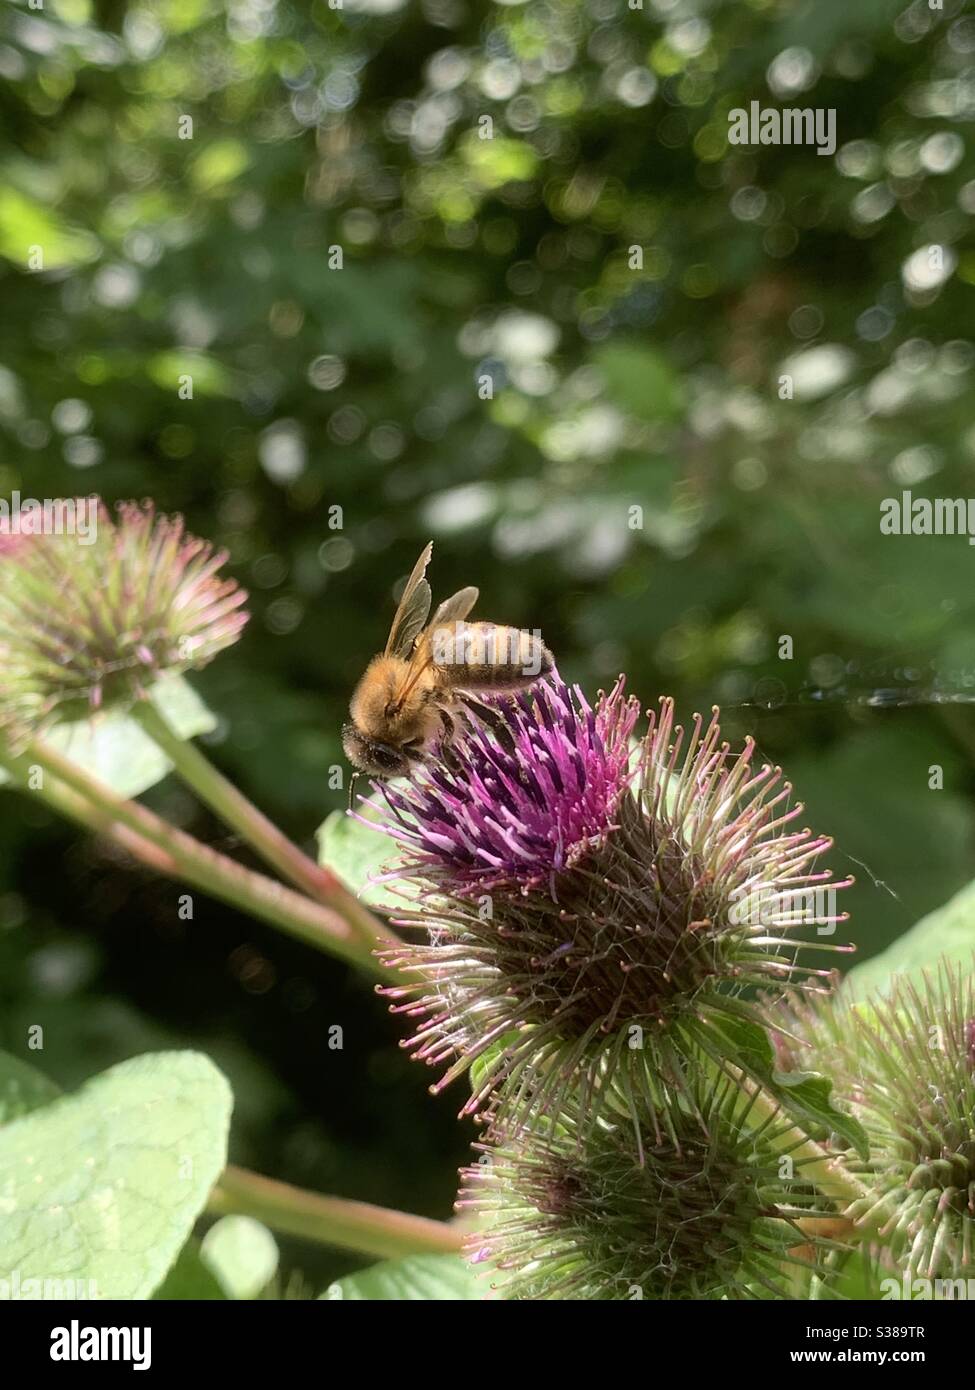 Delapre, Northants, UK - 20 July 2020: Lesser burdock, a species of daisy, with a bumble bee on board. Also known as common, cuckoo button, louse bur and wild rhubarb. Arctium minus. Stock Photo